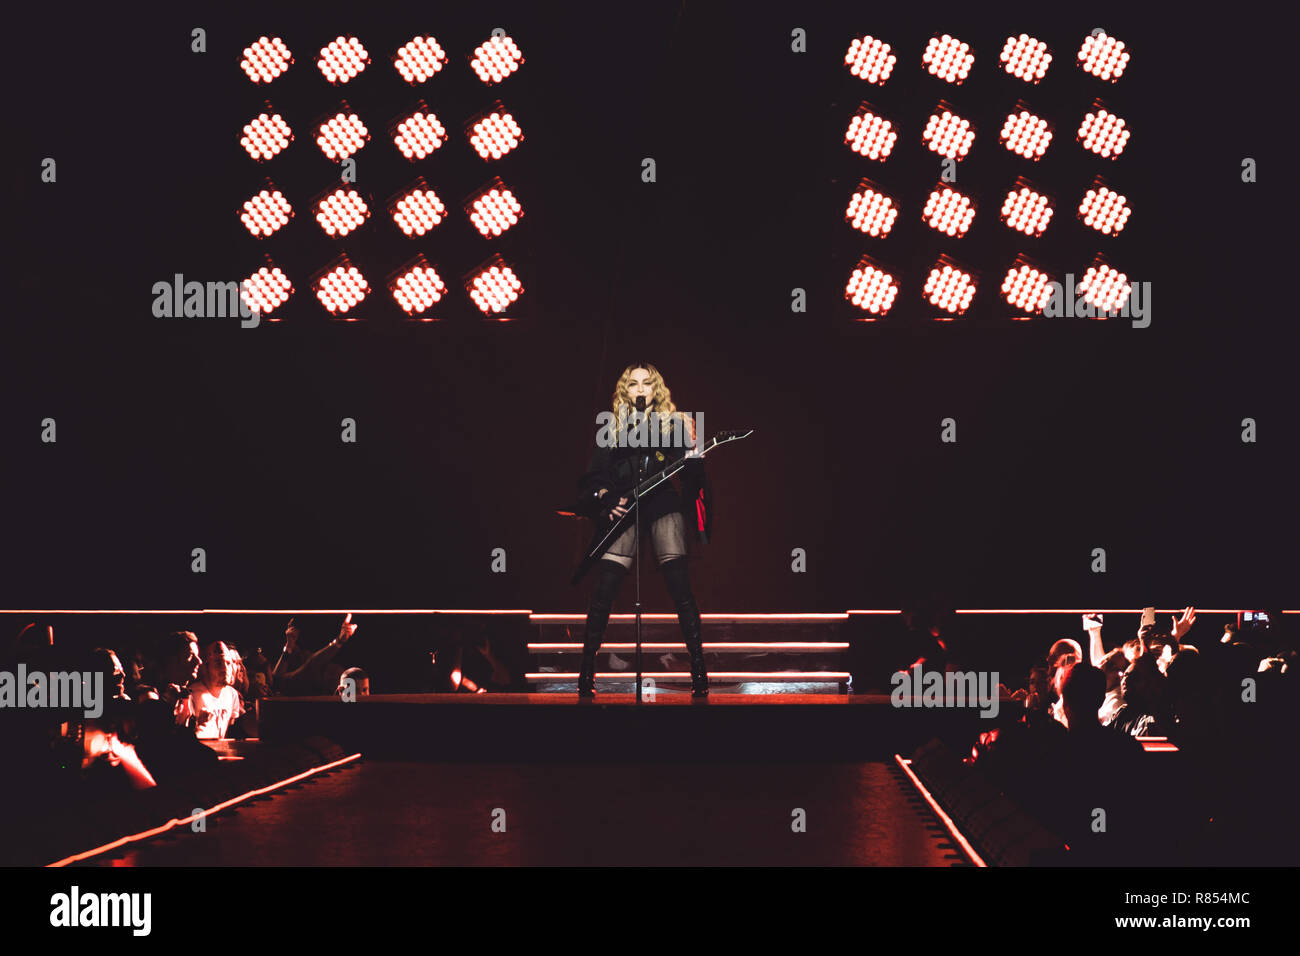 The American singer Madonna performing live on stage in Berlin for her 'Rebel Heart' world tour 2015 Photo: Alessandro Bosio/Alamy Stock Photo